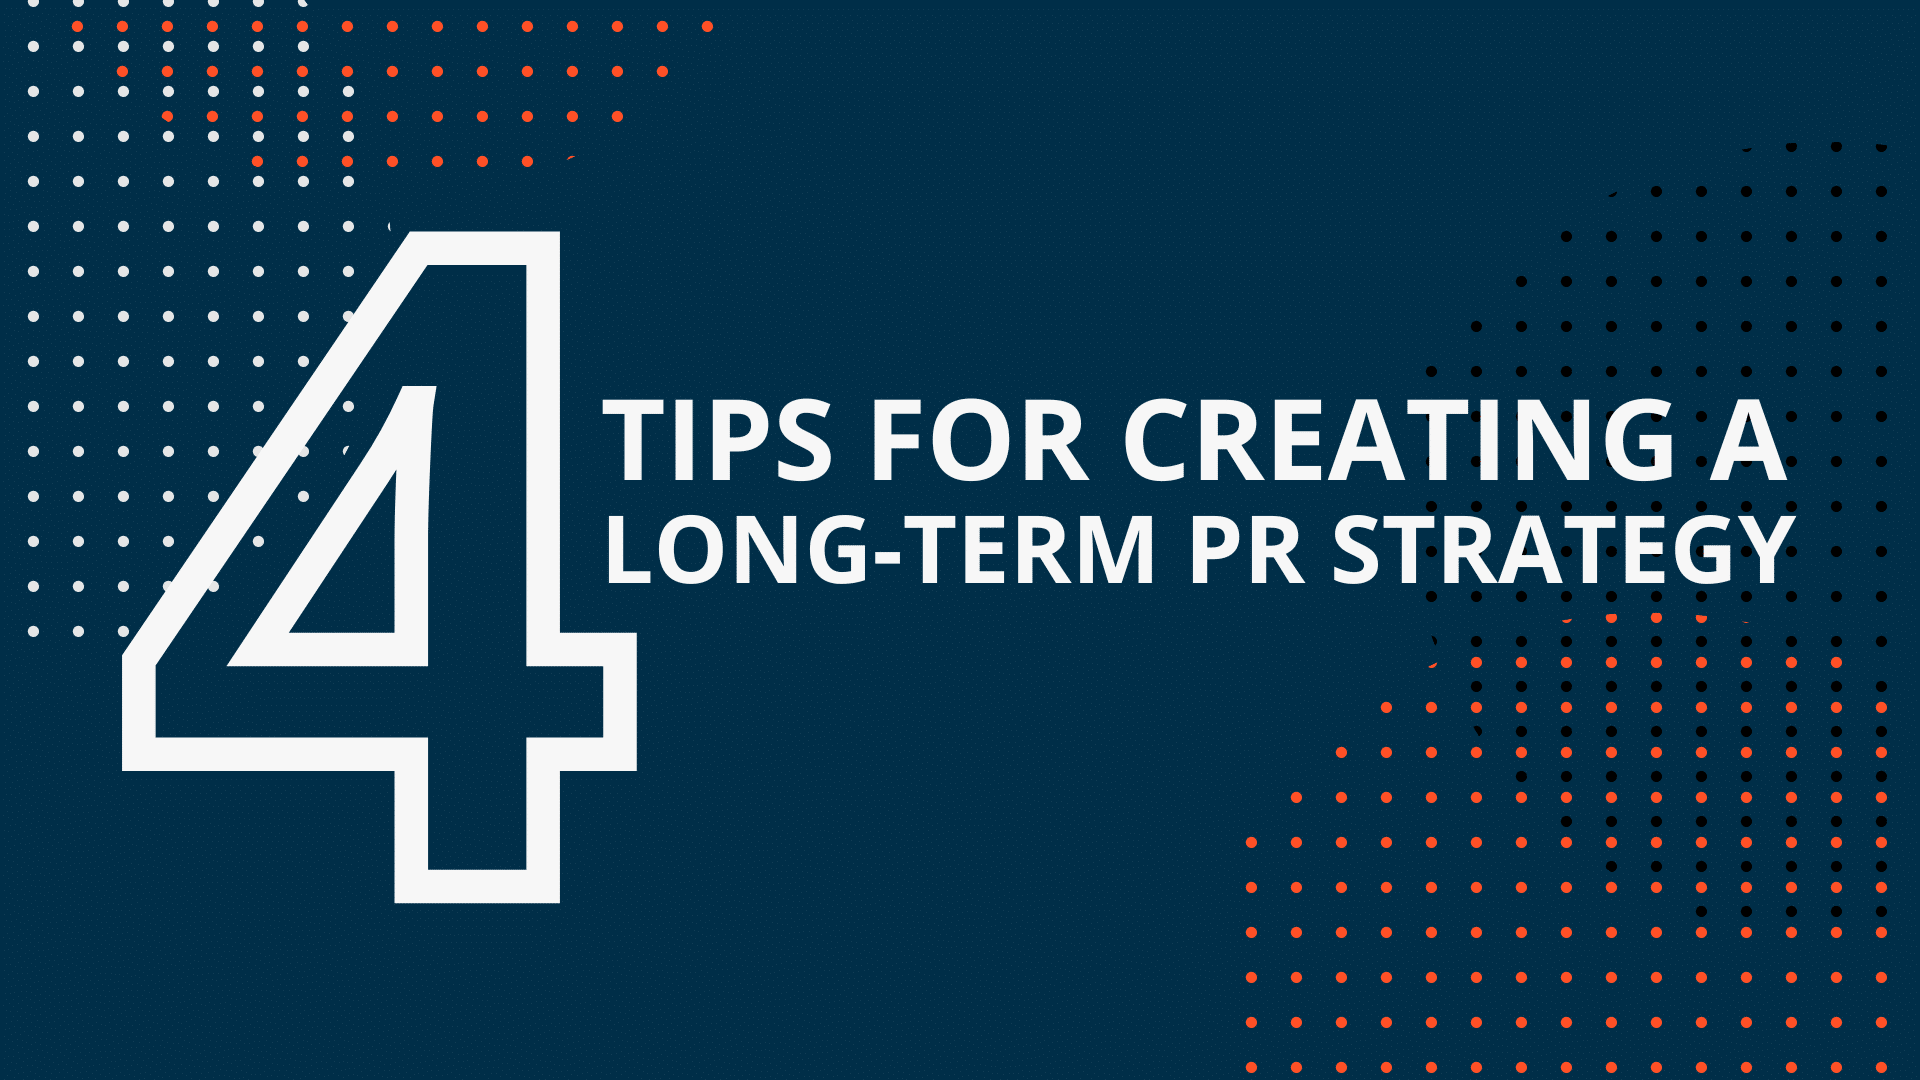 Why you should play the long game: 4 tips for creating a long-term PR strategy